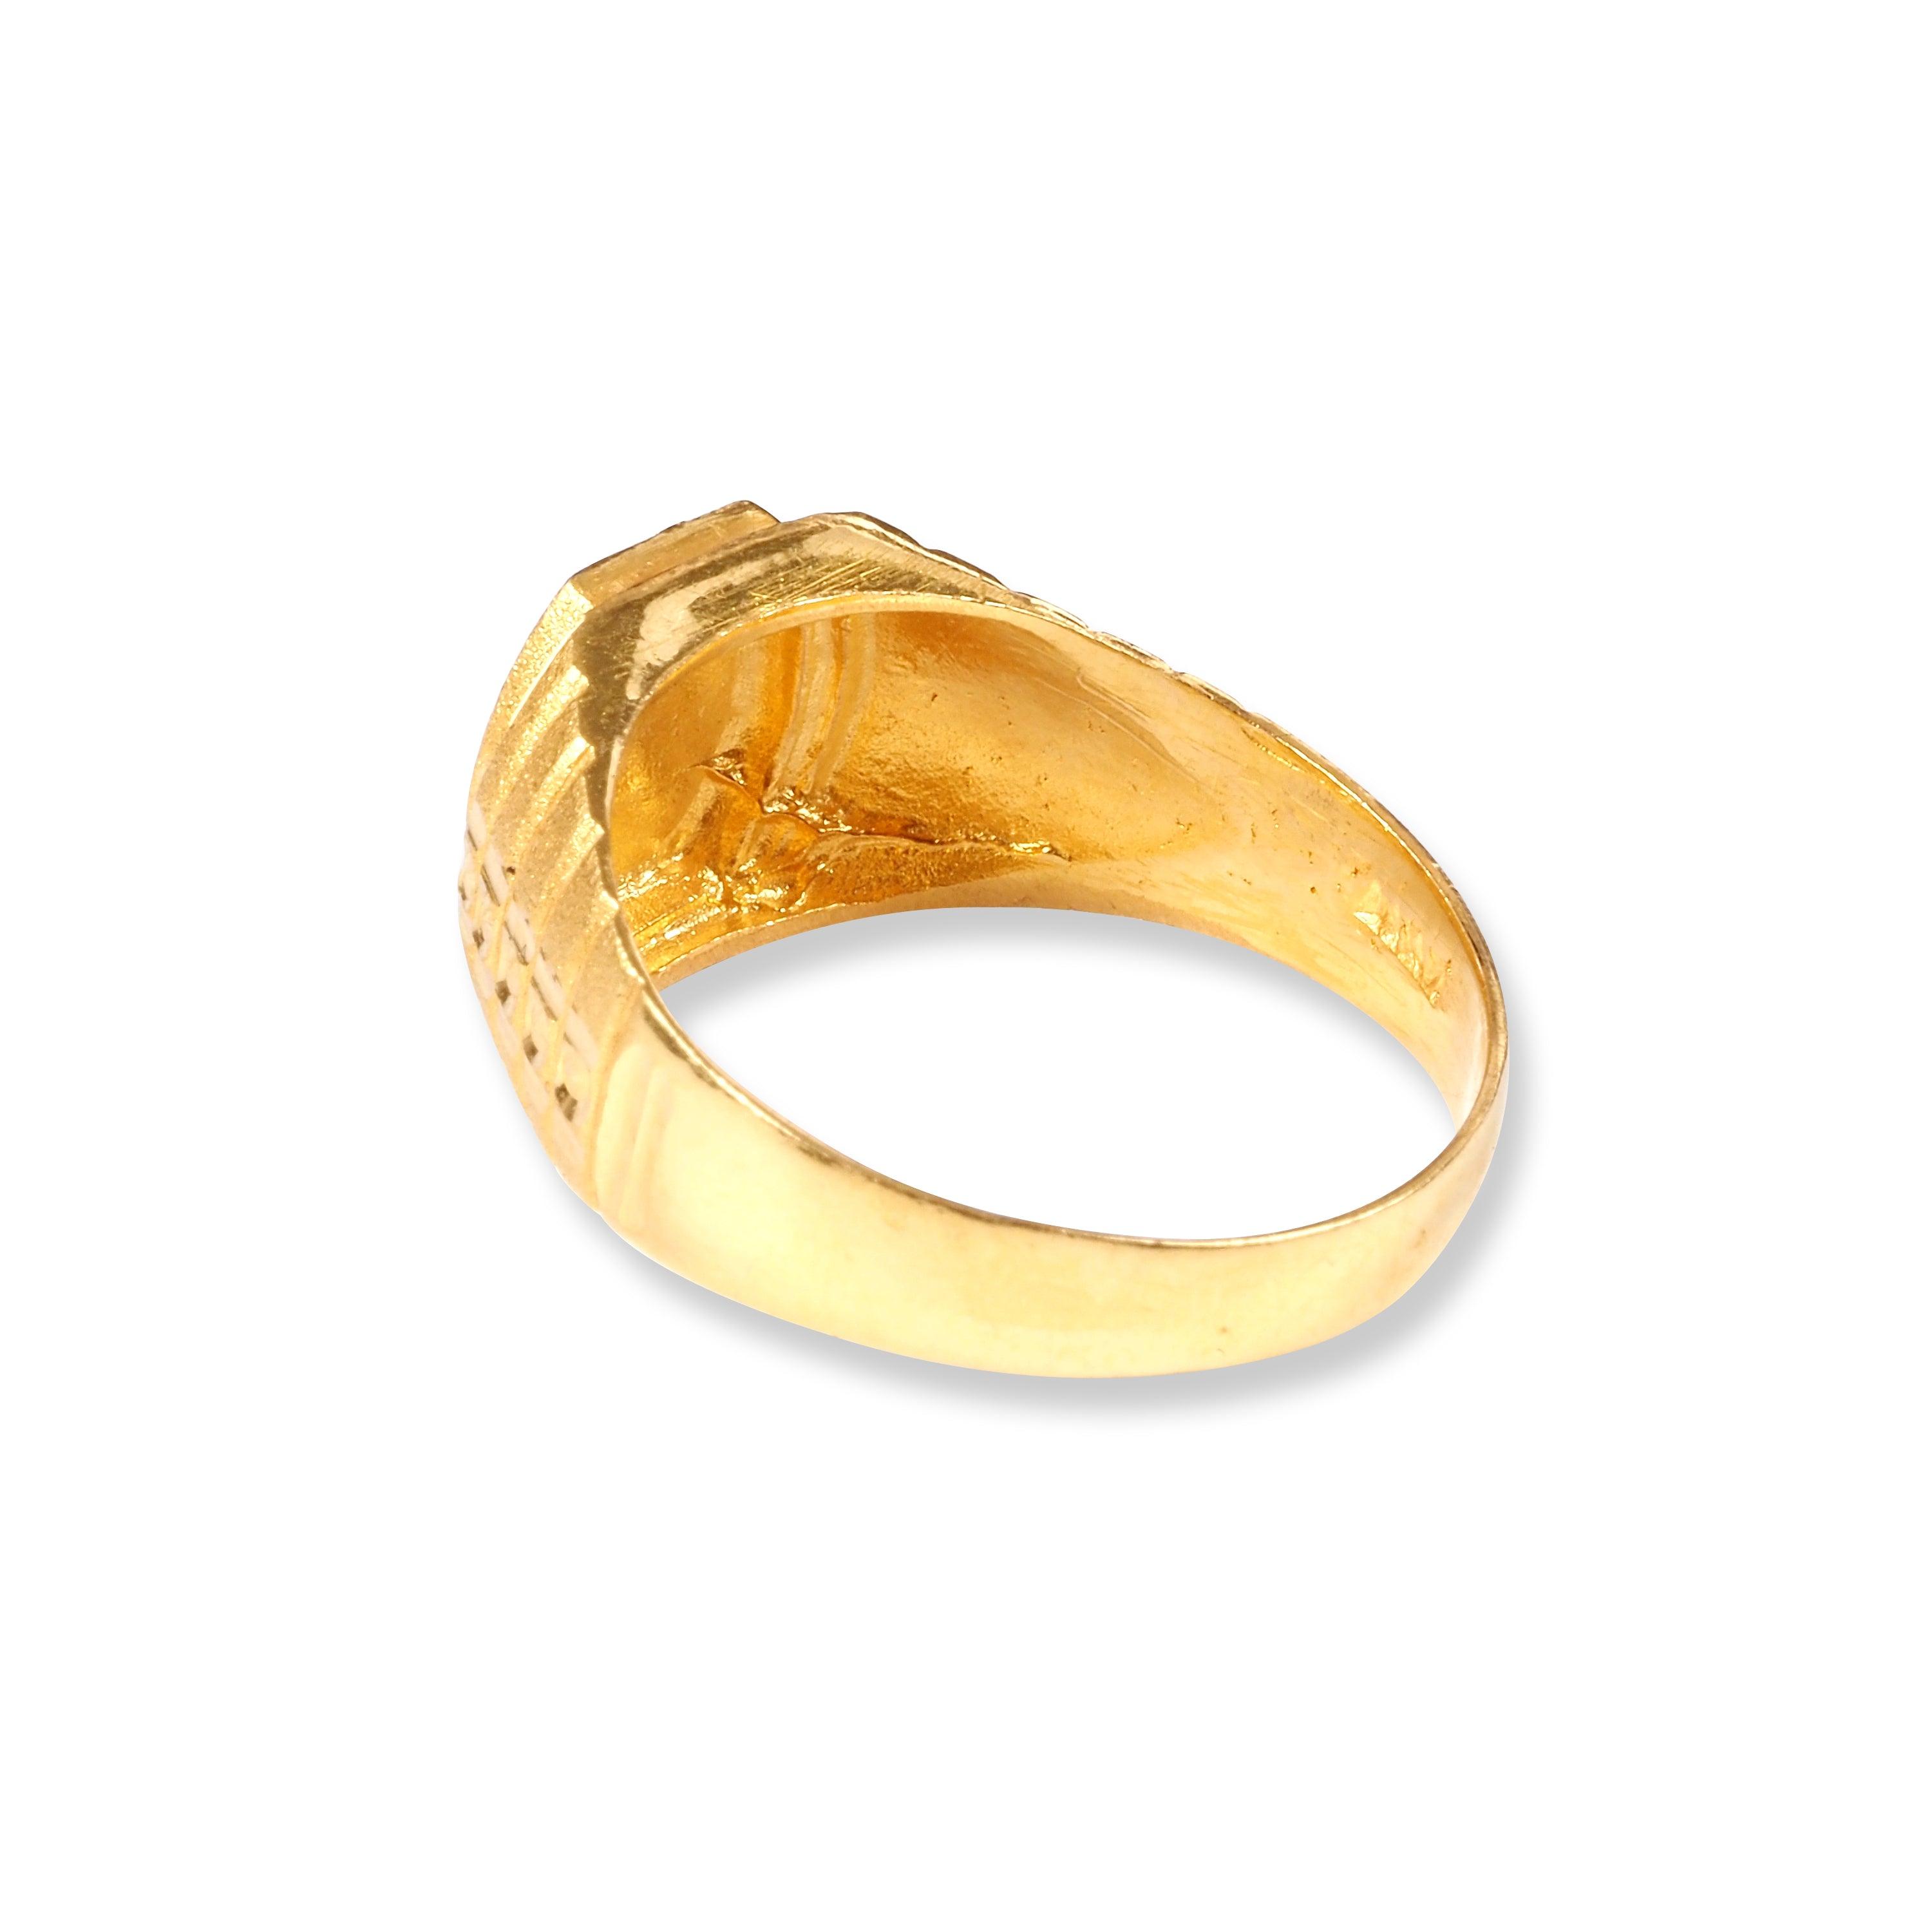 22ct Gold Gents Signet Ring GBR-8320 - Minar Jewellers